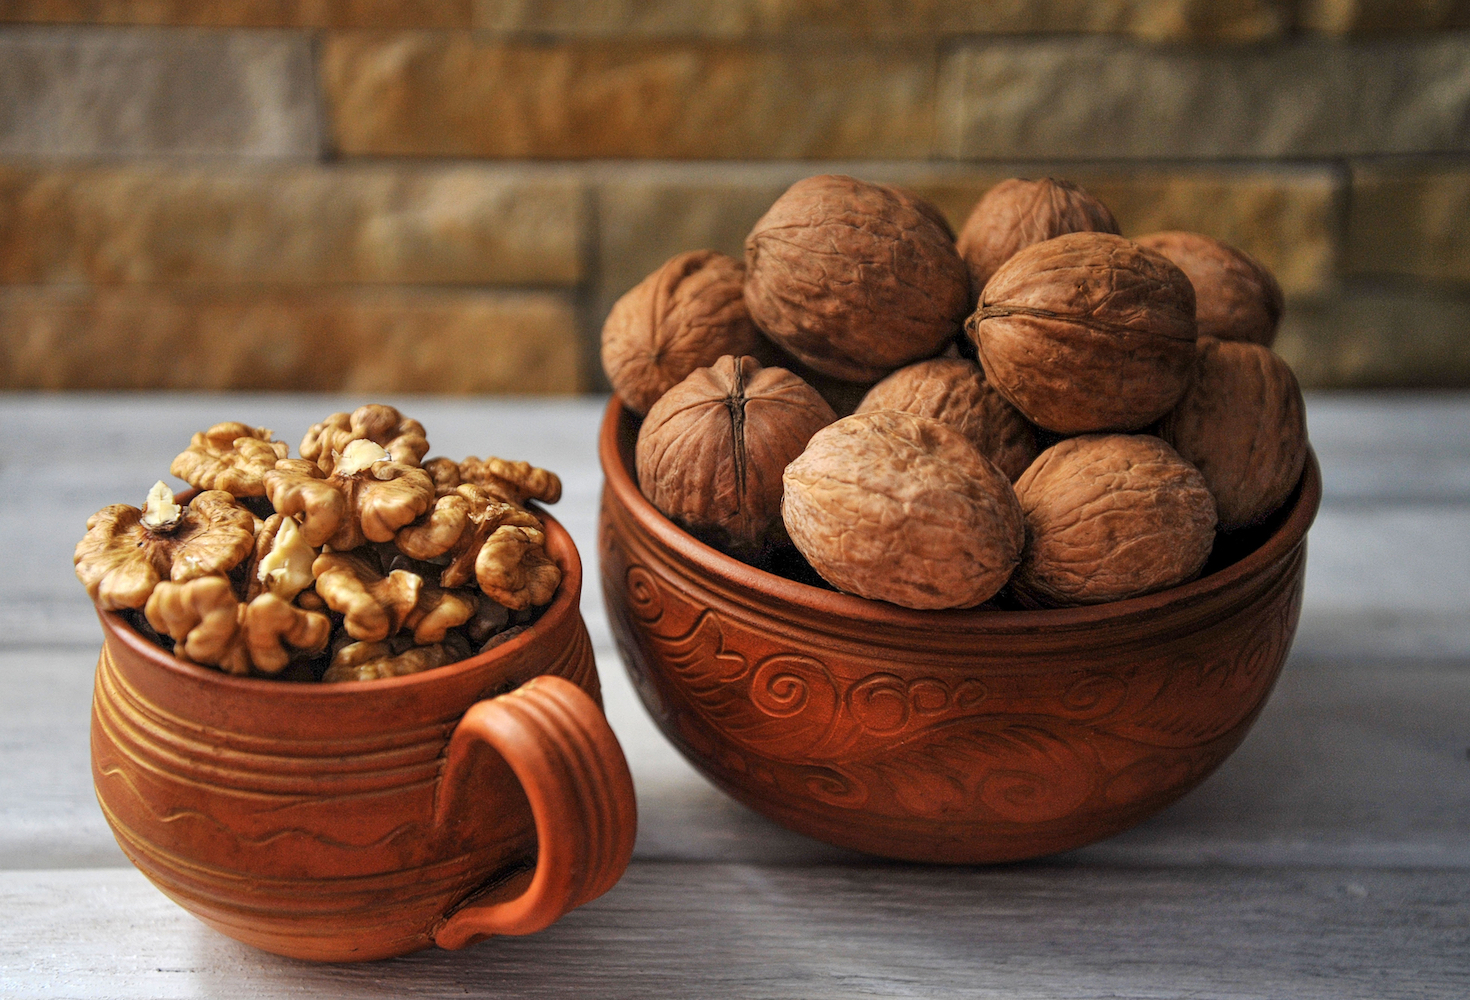 English walnuts in bowl and cup.